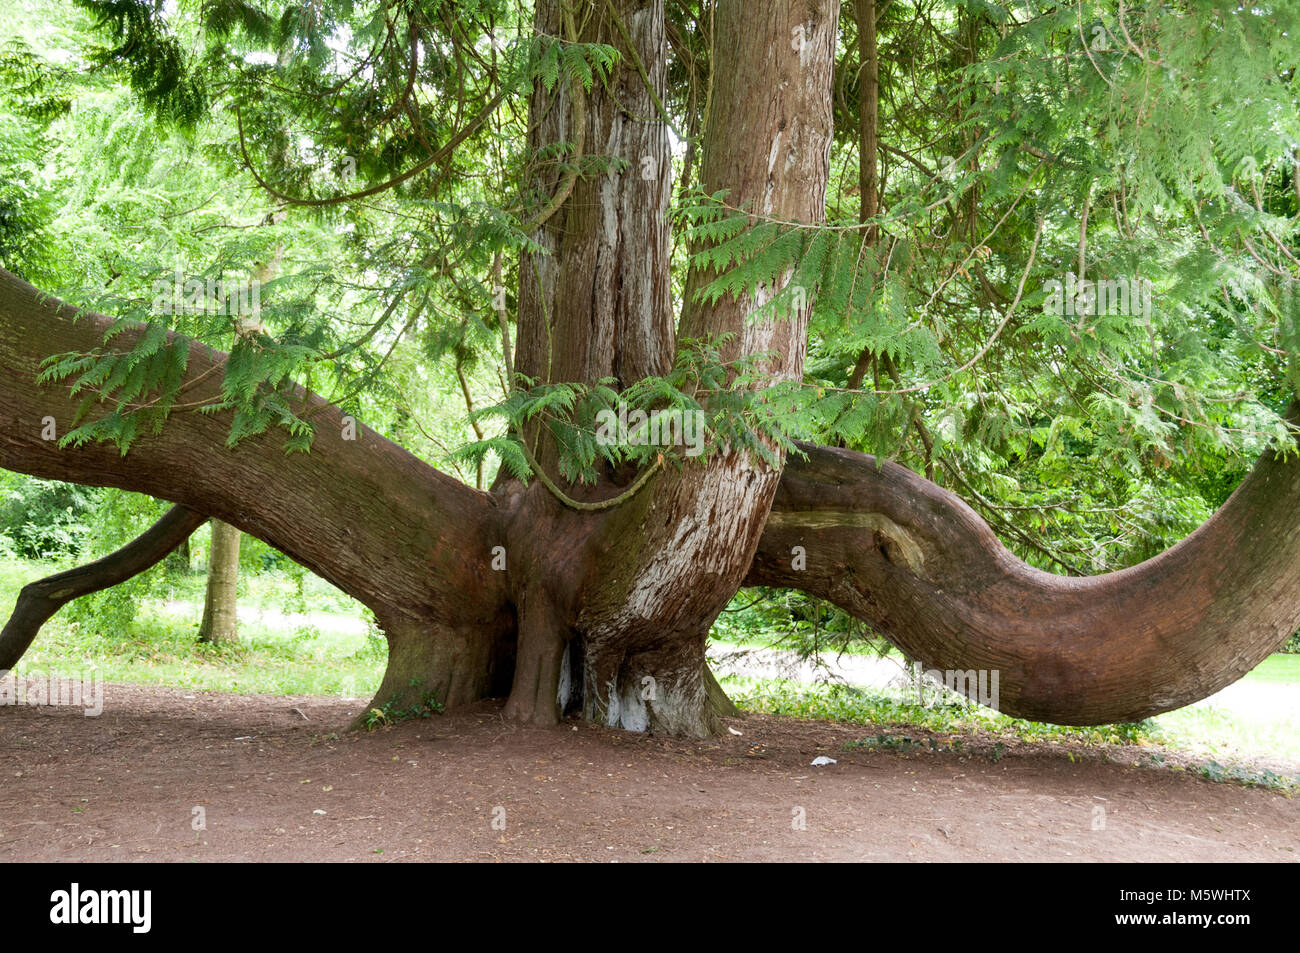 An unusual tree is a Red Cedar, also known as Western Red Cedar, on the grounds of Blarney Castle in Southern Ireland. Stock Photo